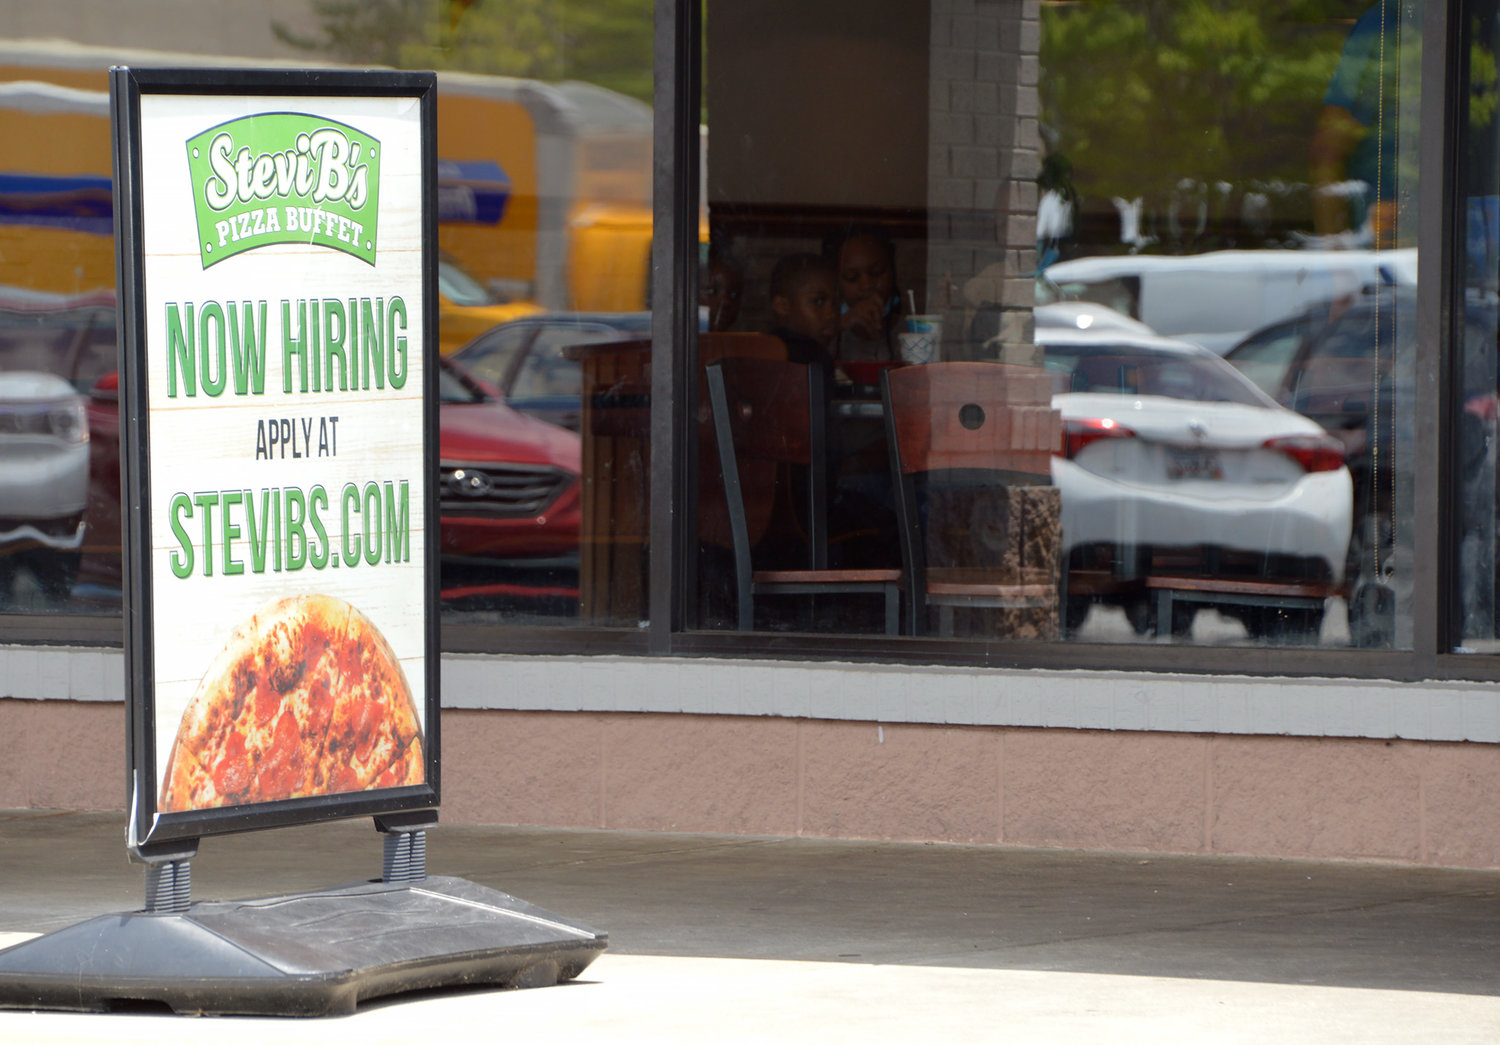 A hiring sign stands outside a Stevi B's restaurant in Hiram, Ga., July 8, 2022. (Christian Index/Henry Durand, File)